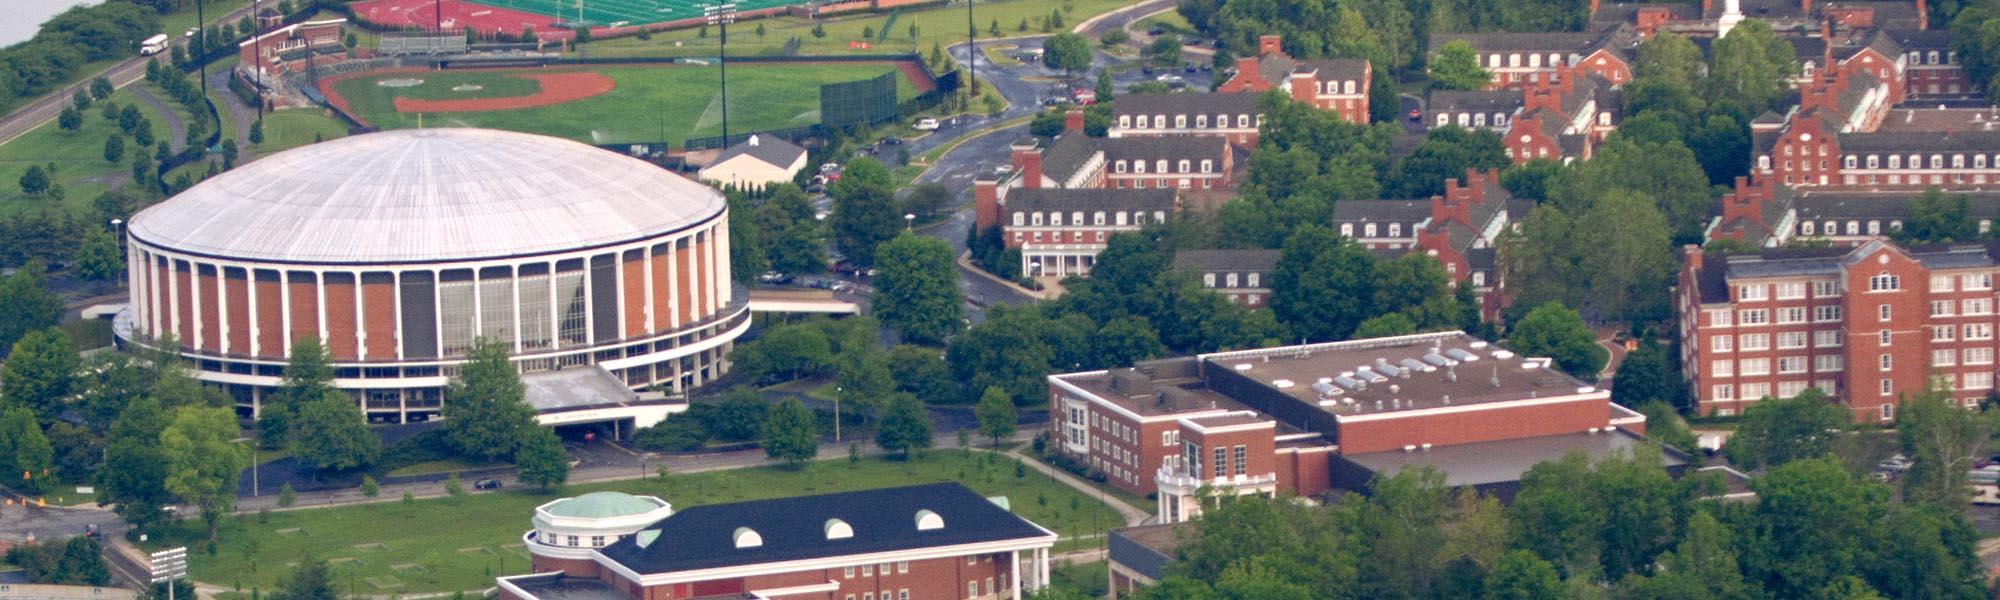 areal view of campus showing the convocation center and nearby buildings